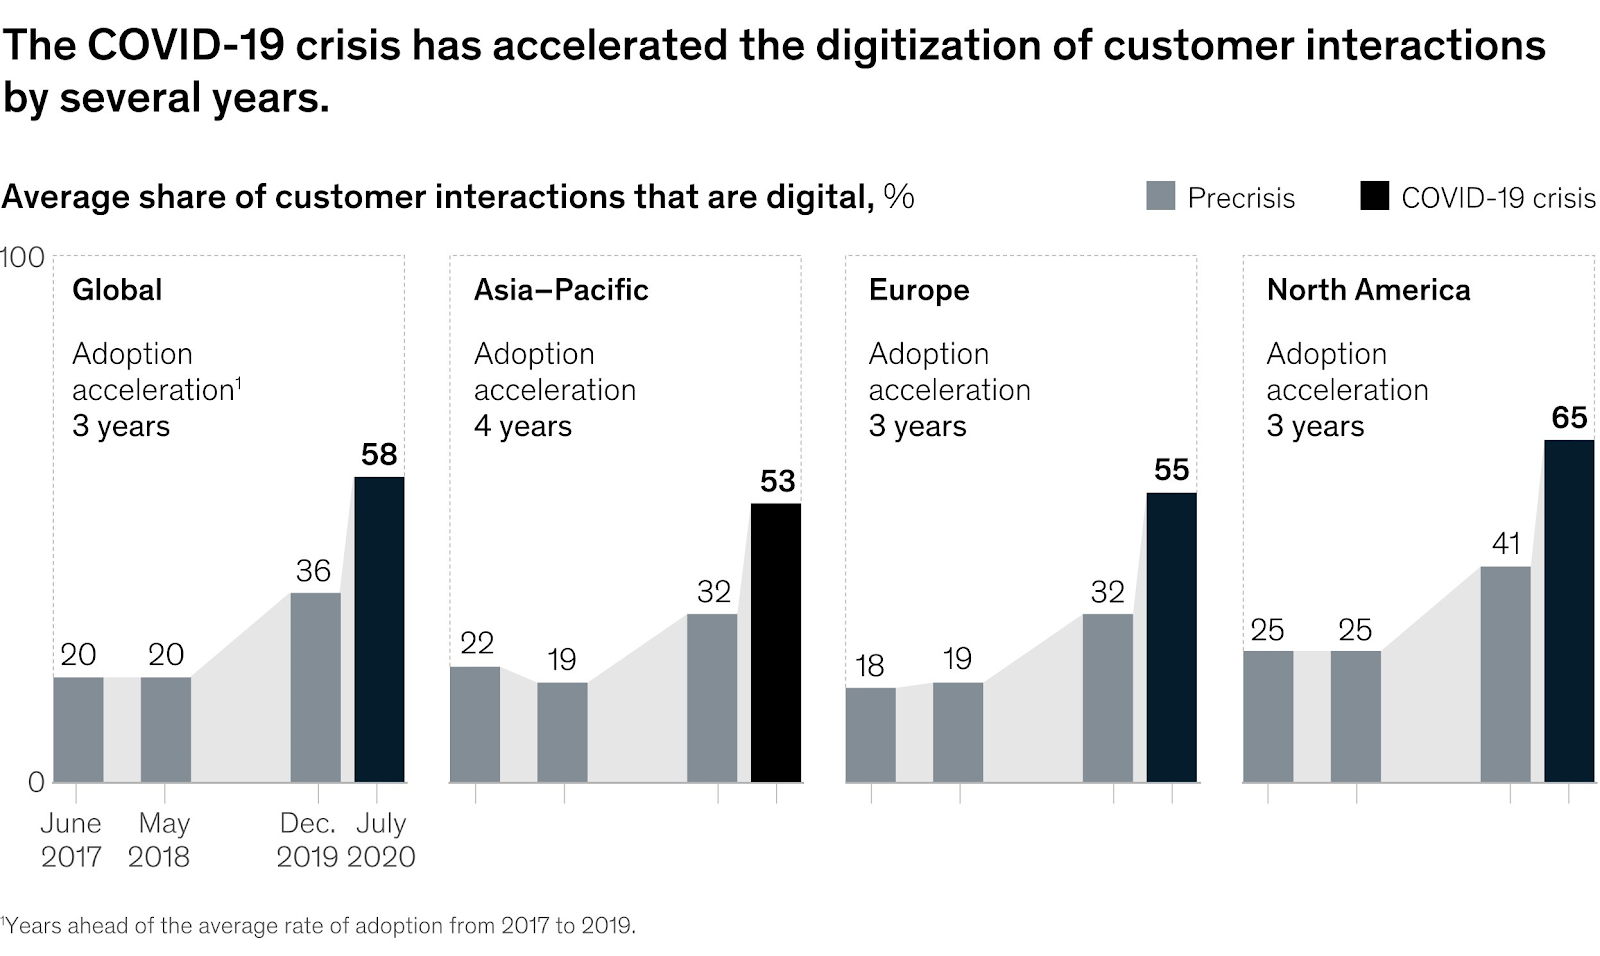 The COVID-19 crisis has accelerated the digitisation of customer interactions by several years